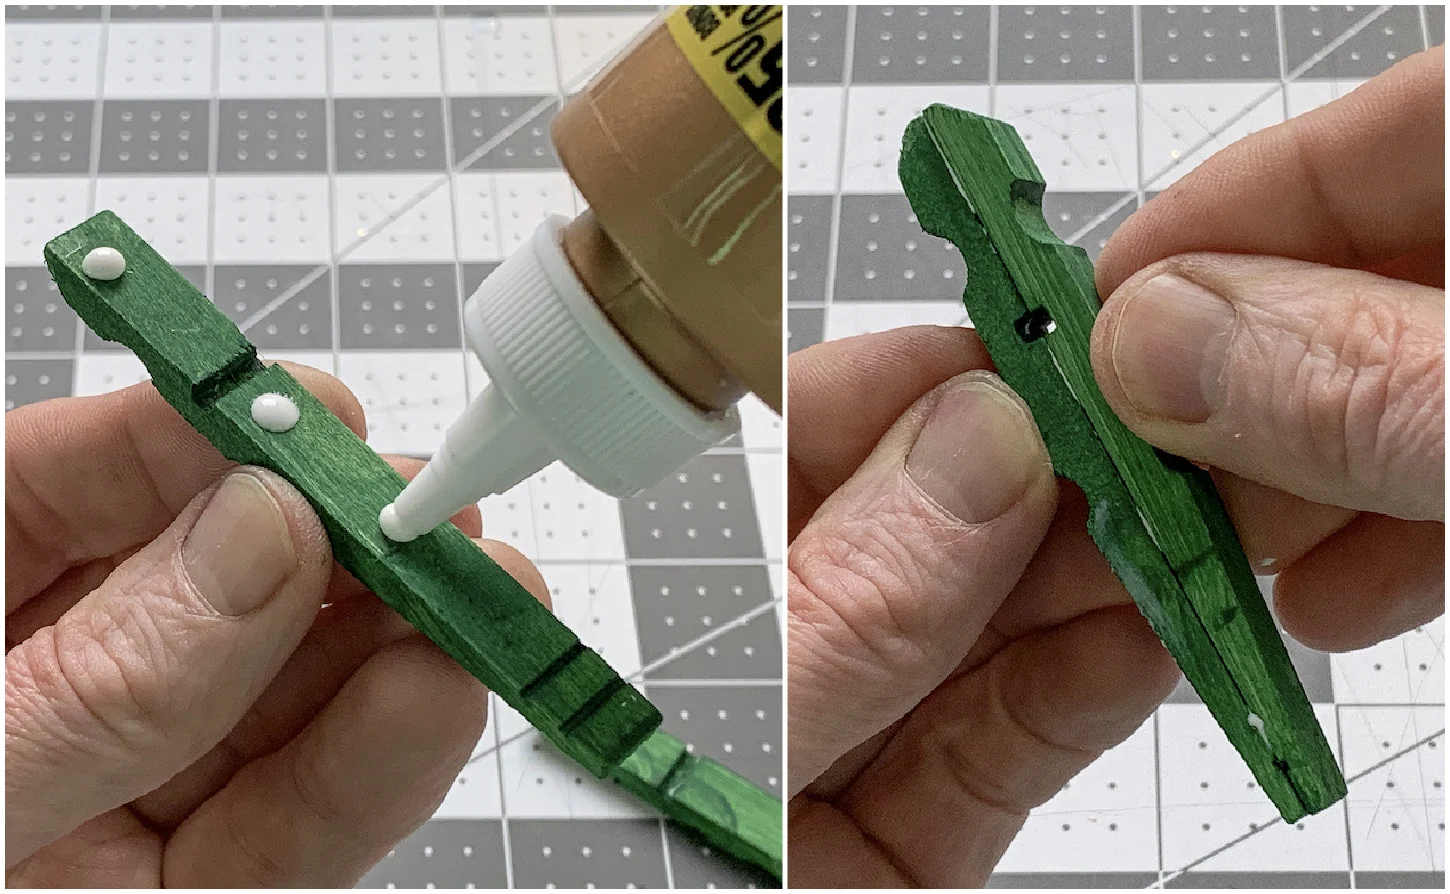 Gluing two painted clothespin halves together to form a body